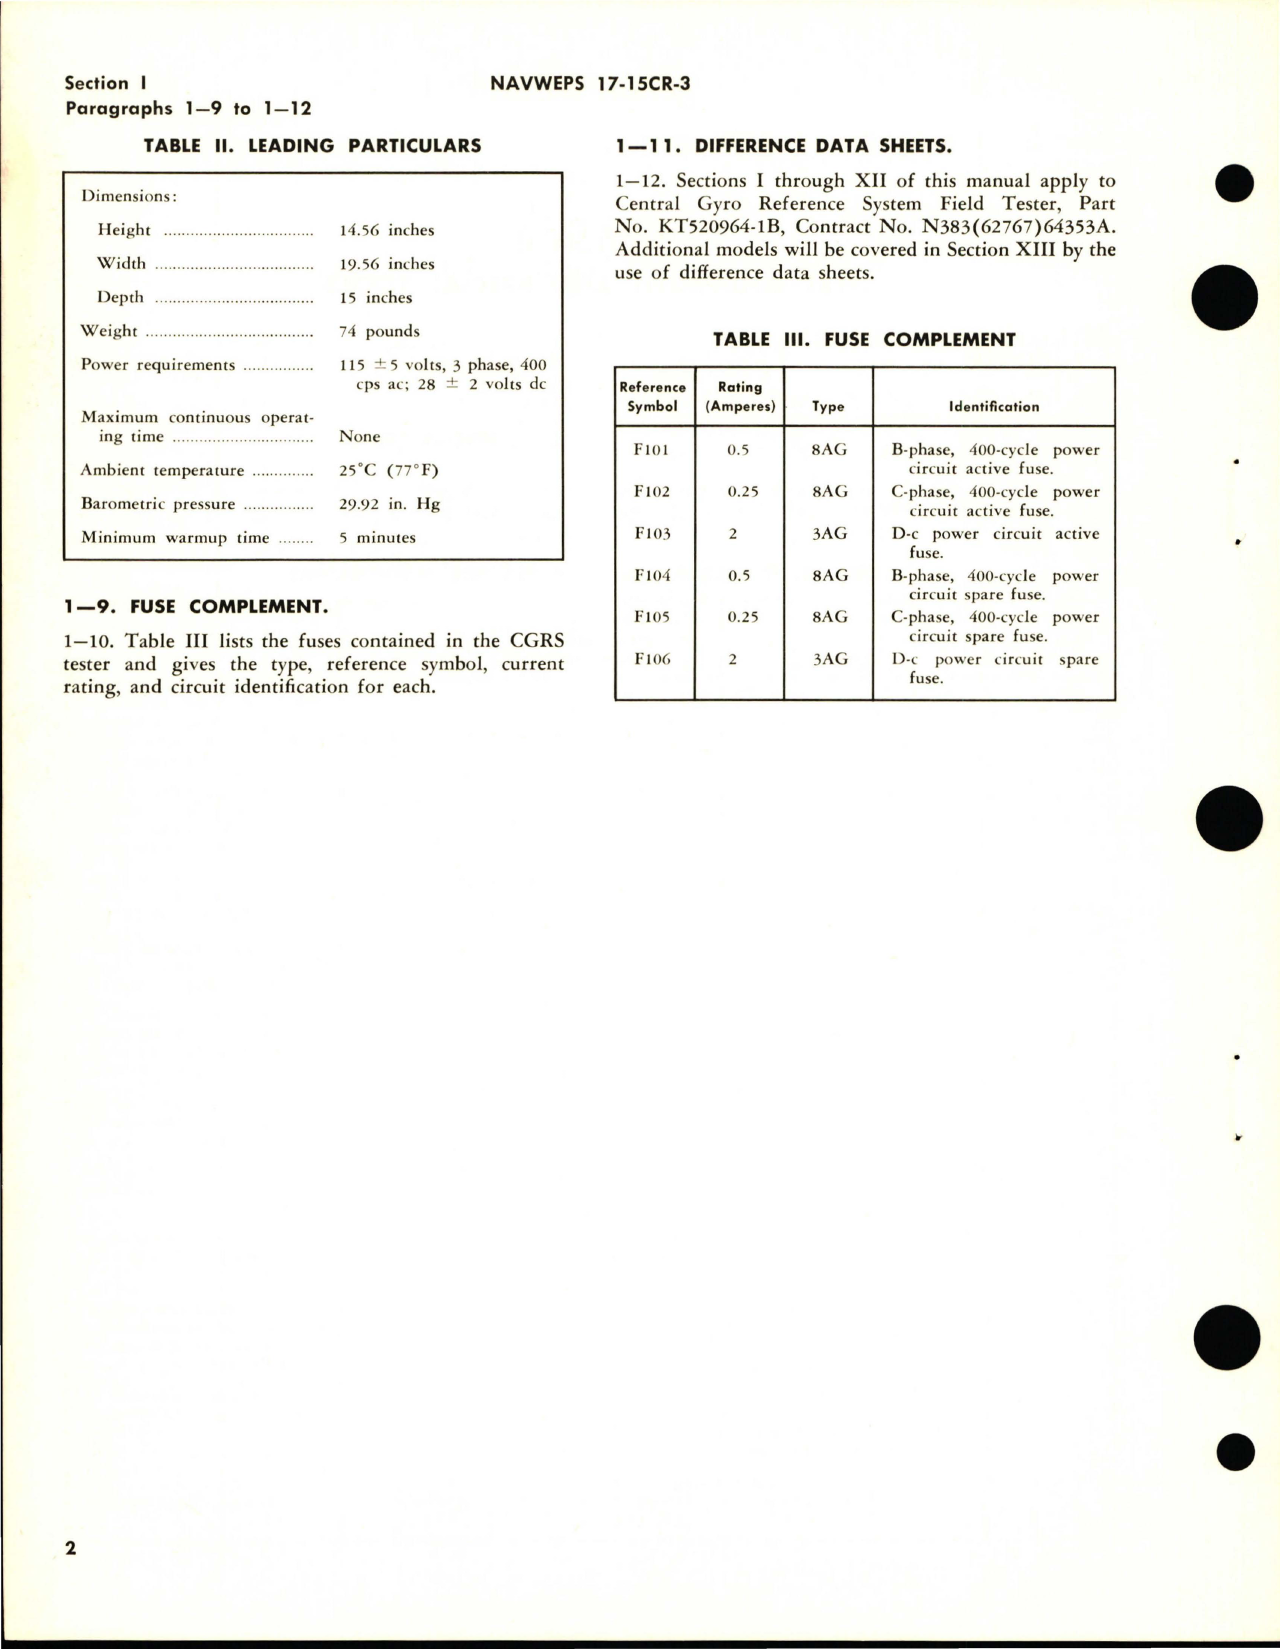 Sample page 8 from AirCorps Library document: Operation and Service Instructions with Illustrated Parts Breakdown for CGRS Field Tester - Part KT520964-1B